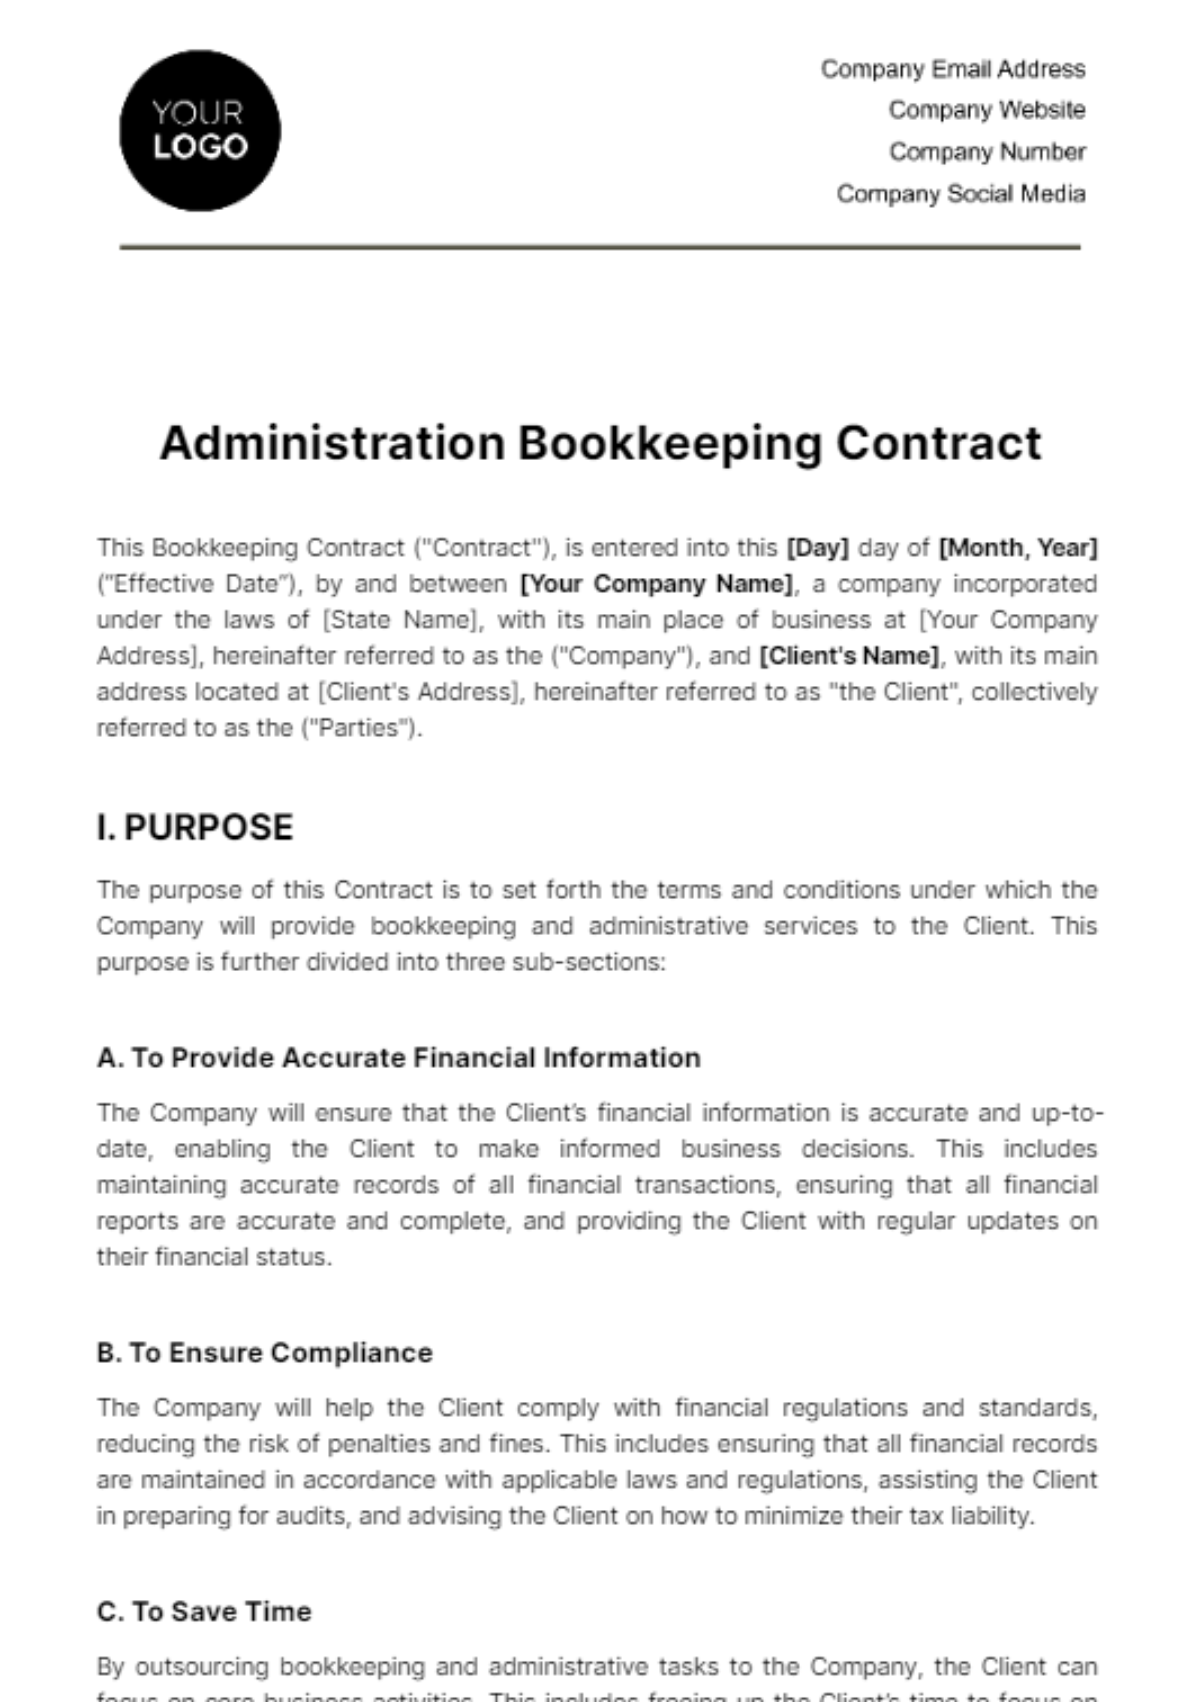 Free Administration Bookkeeping Contract Template